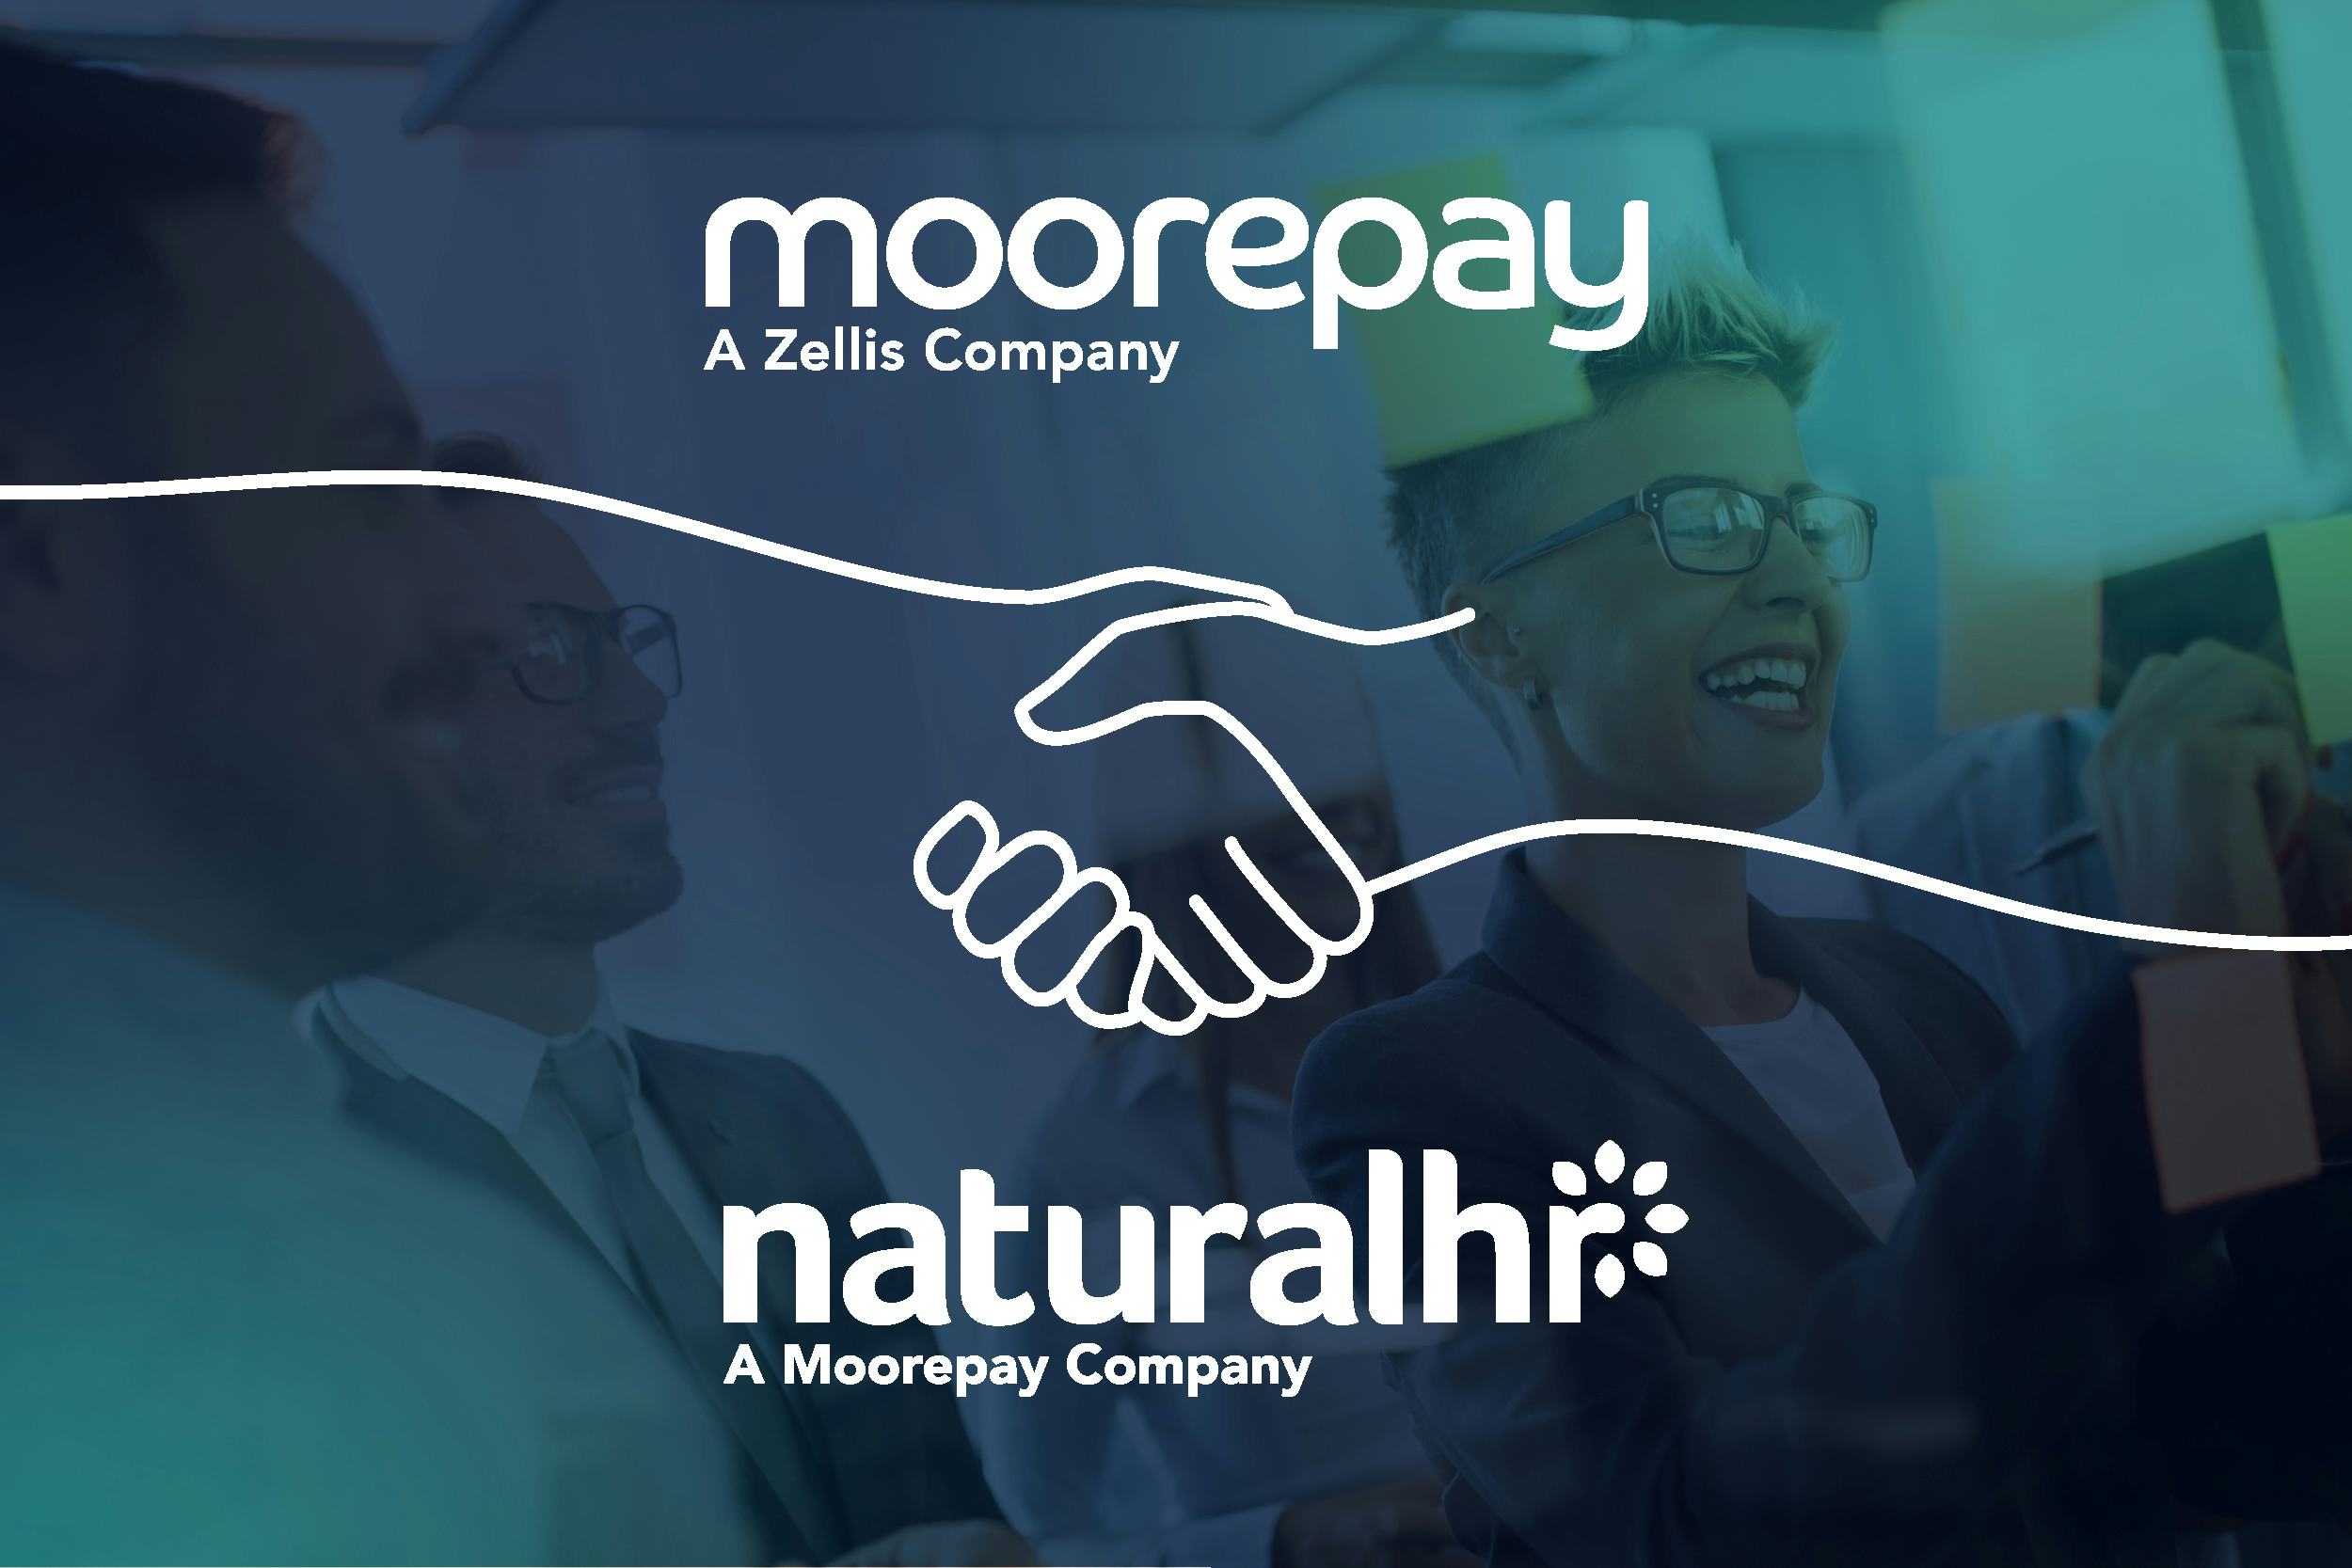 Moorepay (Formerly Natural HR) Software - We’ve joined forces with Natural HR to provide all-in-one Payroll & HR Software.